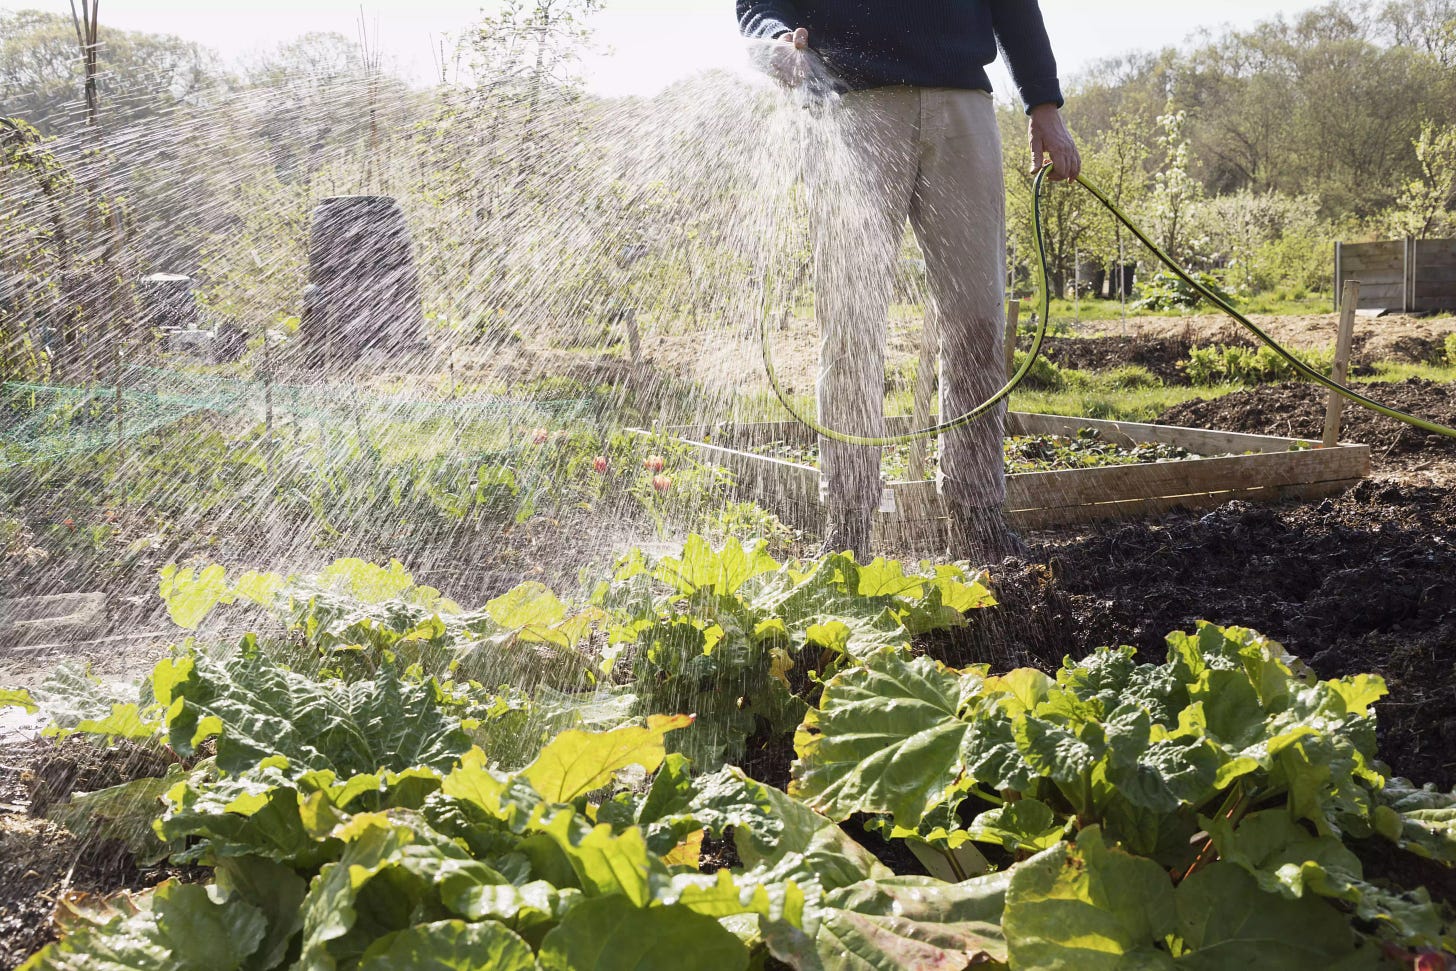 Man waters vegetables with garden hose.